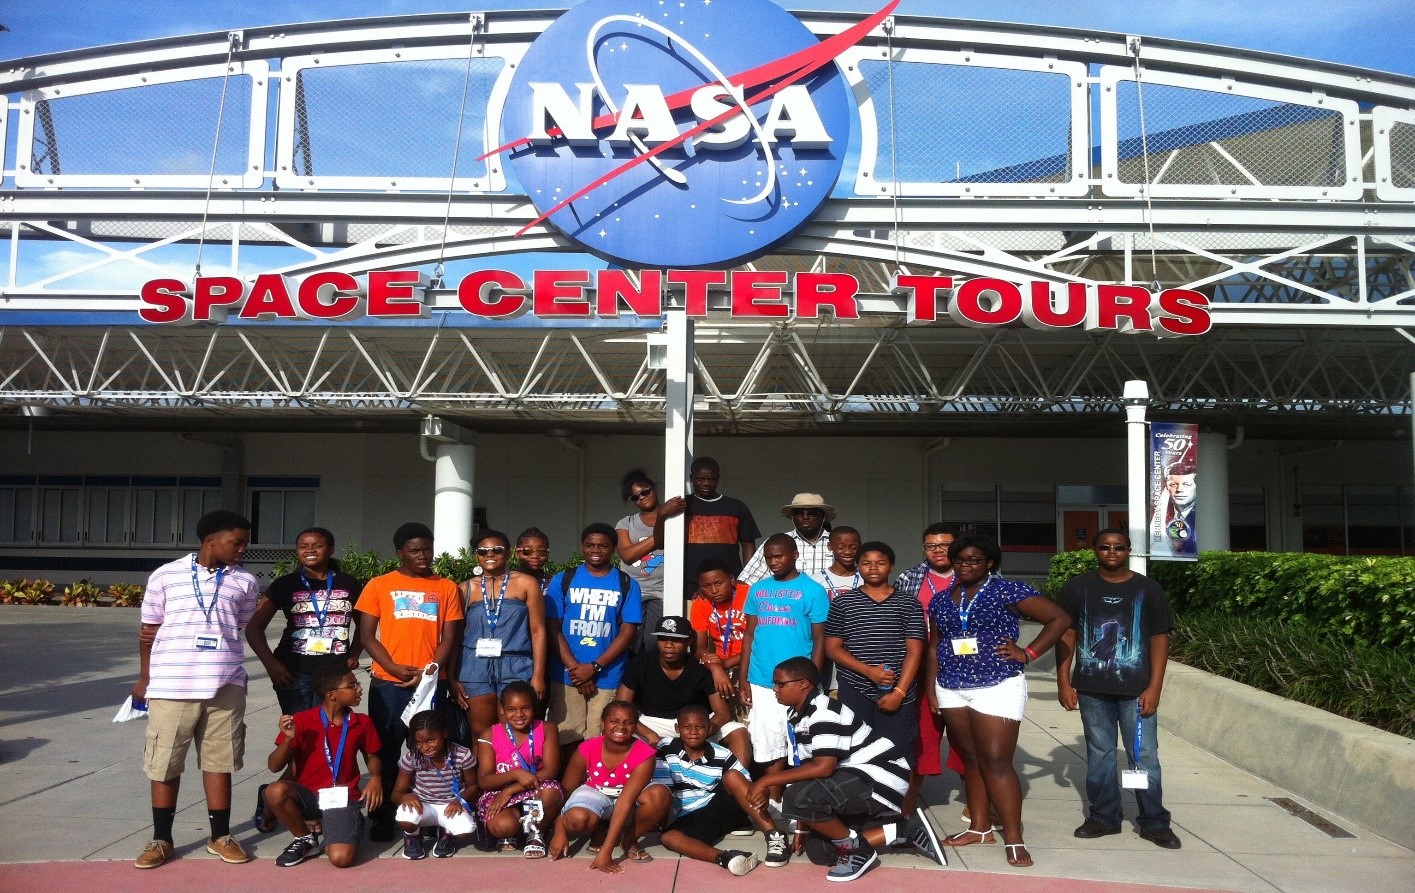 A group of African American children and adults stand under a "NASA Space Center Tours"  sign.